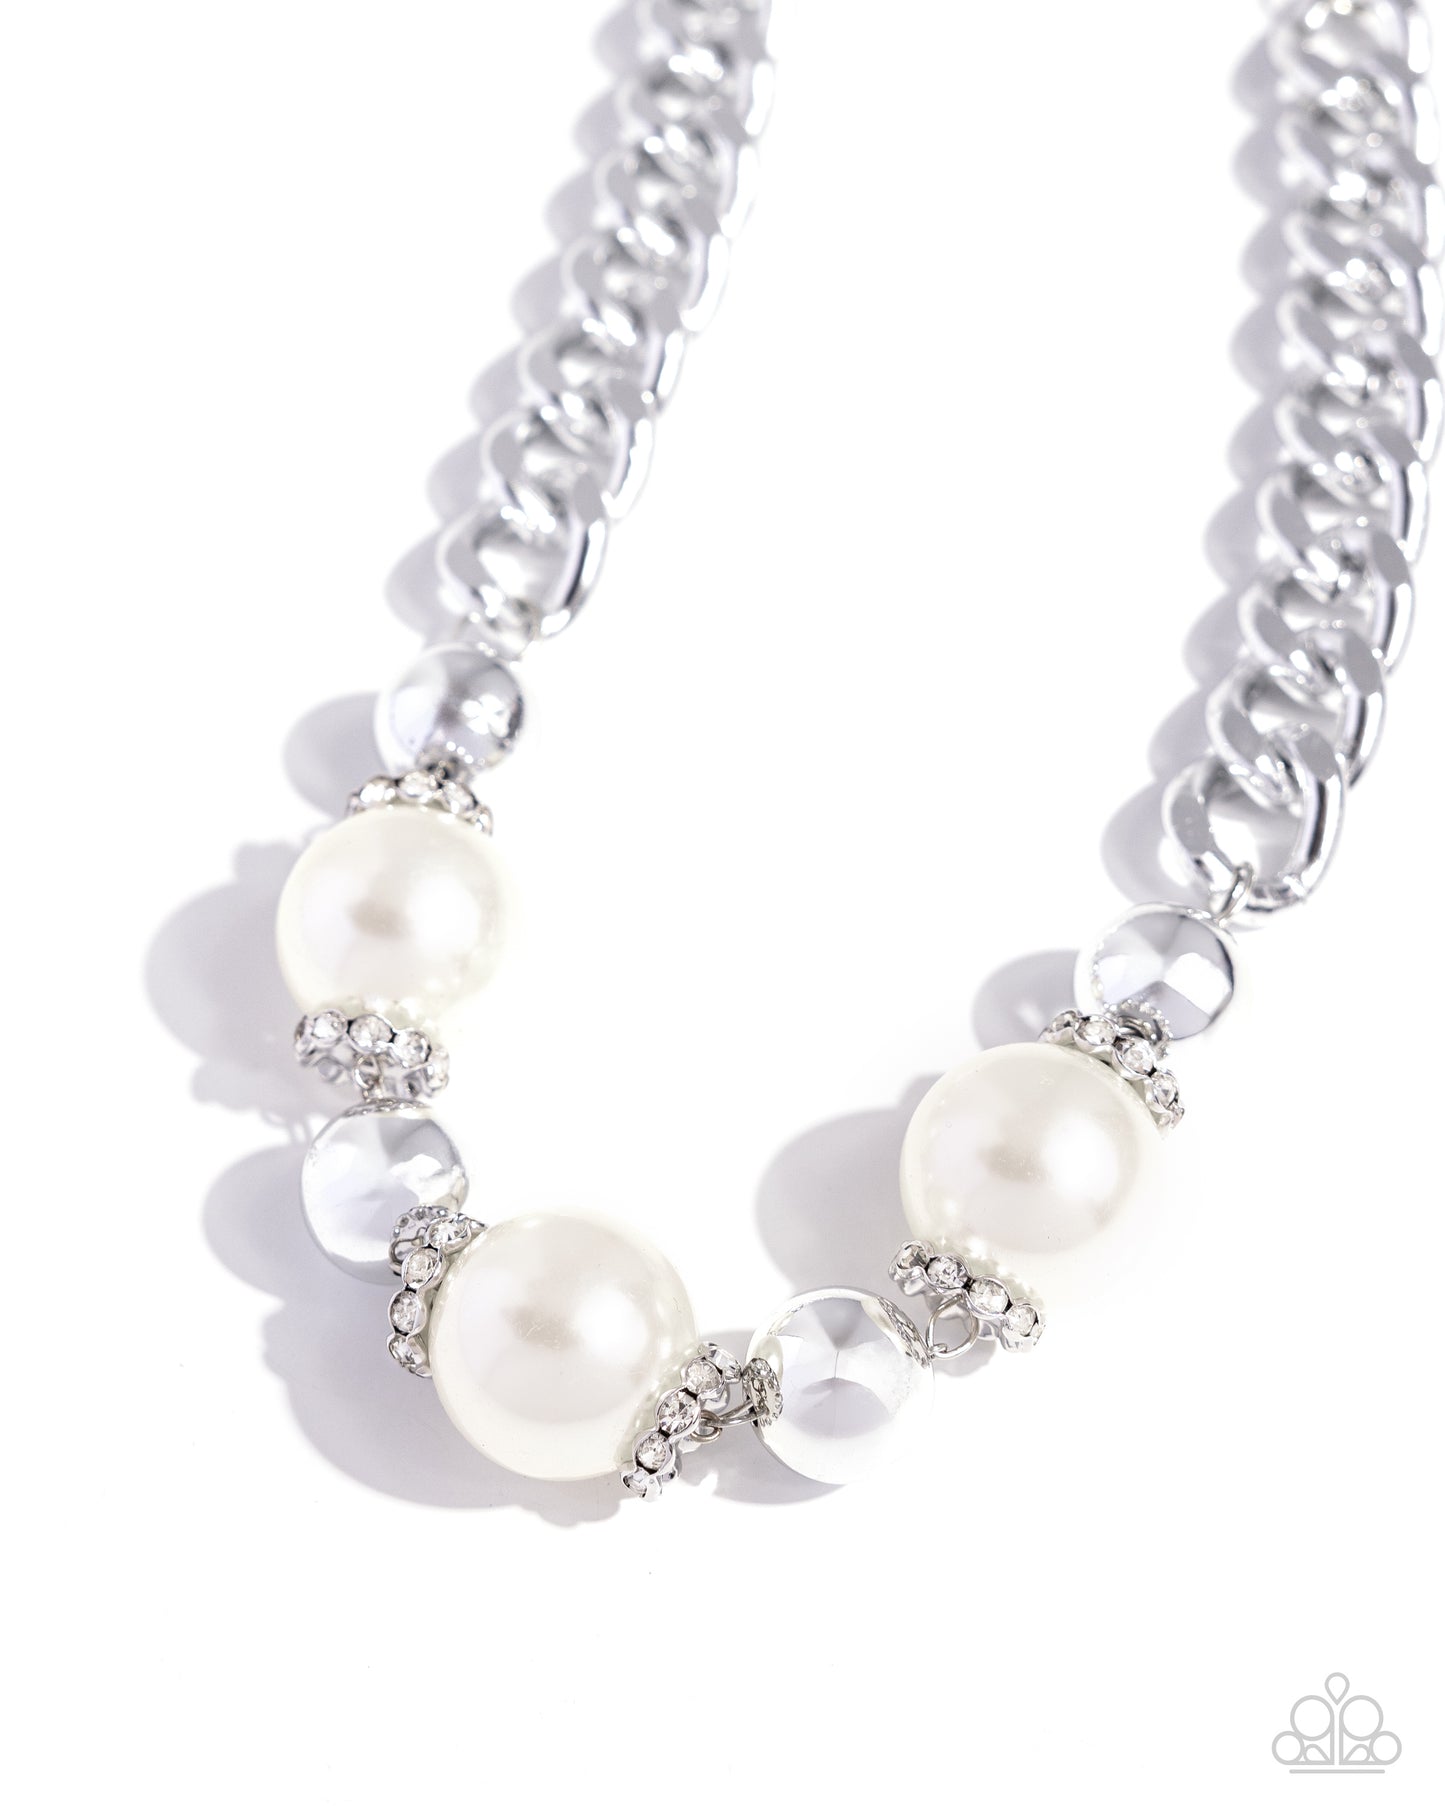 Generously Glossy White Pearl Necklace - Paparazzi Accessories Oversized, high-sheen silver curb chain links gives way to a collection of oversized white pearls, silver beads, and white rhinestone-encrusted silver rings for a glamorously glossy look. Features an adjustable clasp closure. Sold as one individual necklace. Includes one pair of matching earrings. SKU: P2ST-WTXX-155XX